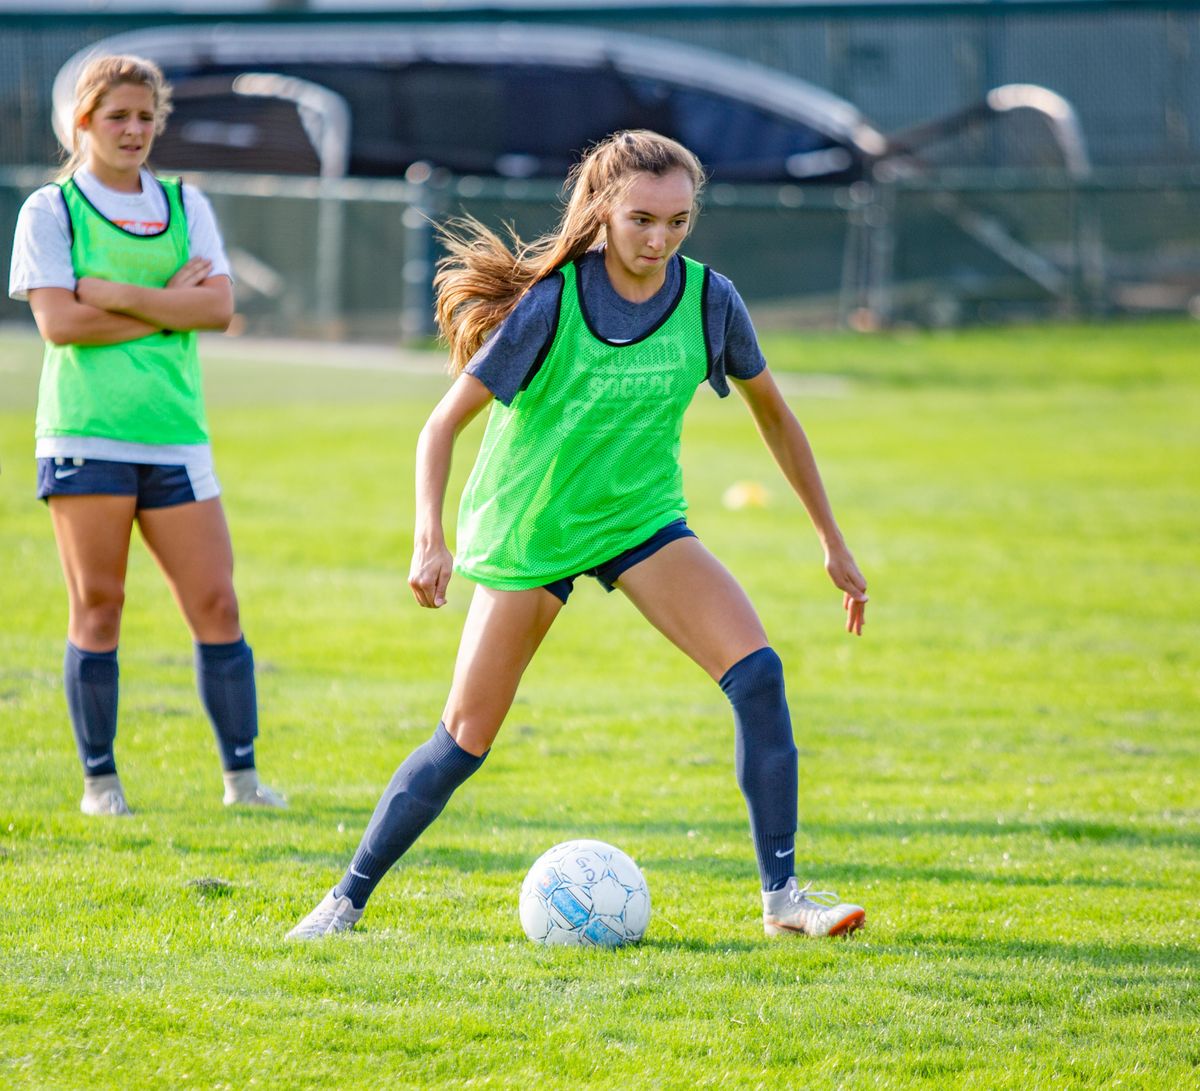 Chelsea Le  dribbles the ball during a drill on  Tuesday during a Gonzaga Prep varsity soccer practice. Le is a midfielder on the team. (Libby Kamrowski / The Spokesman-Review)